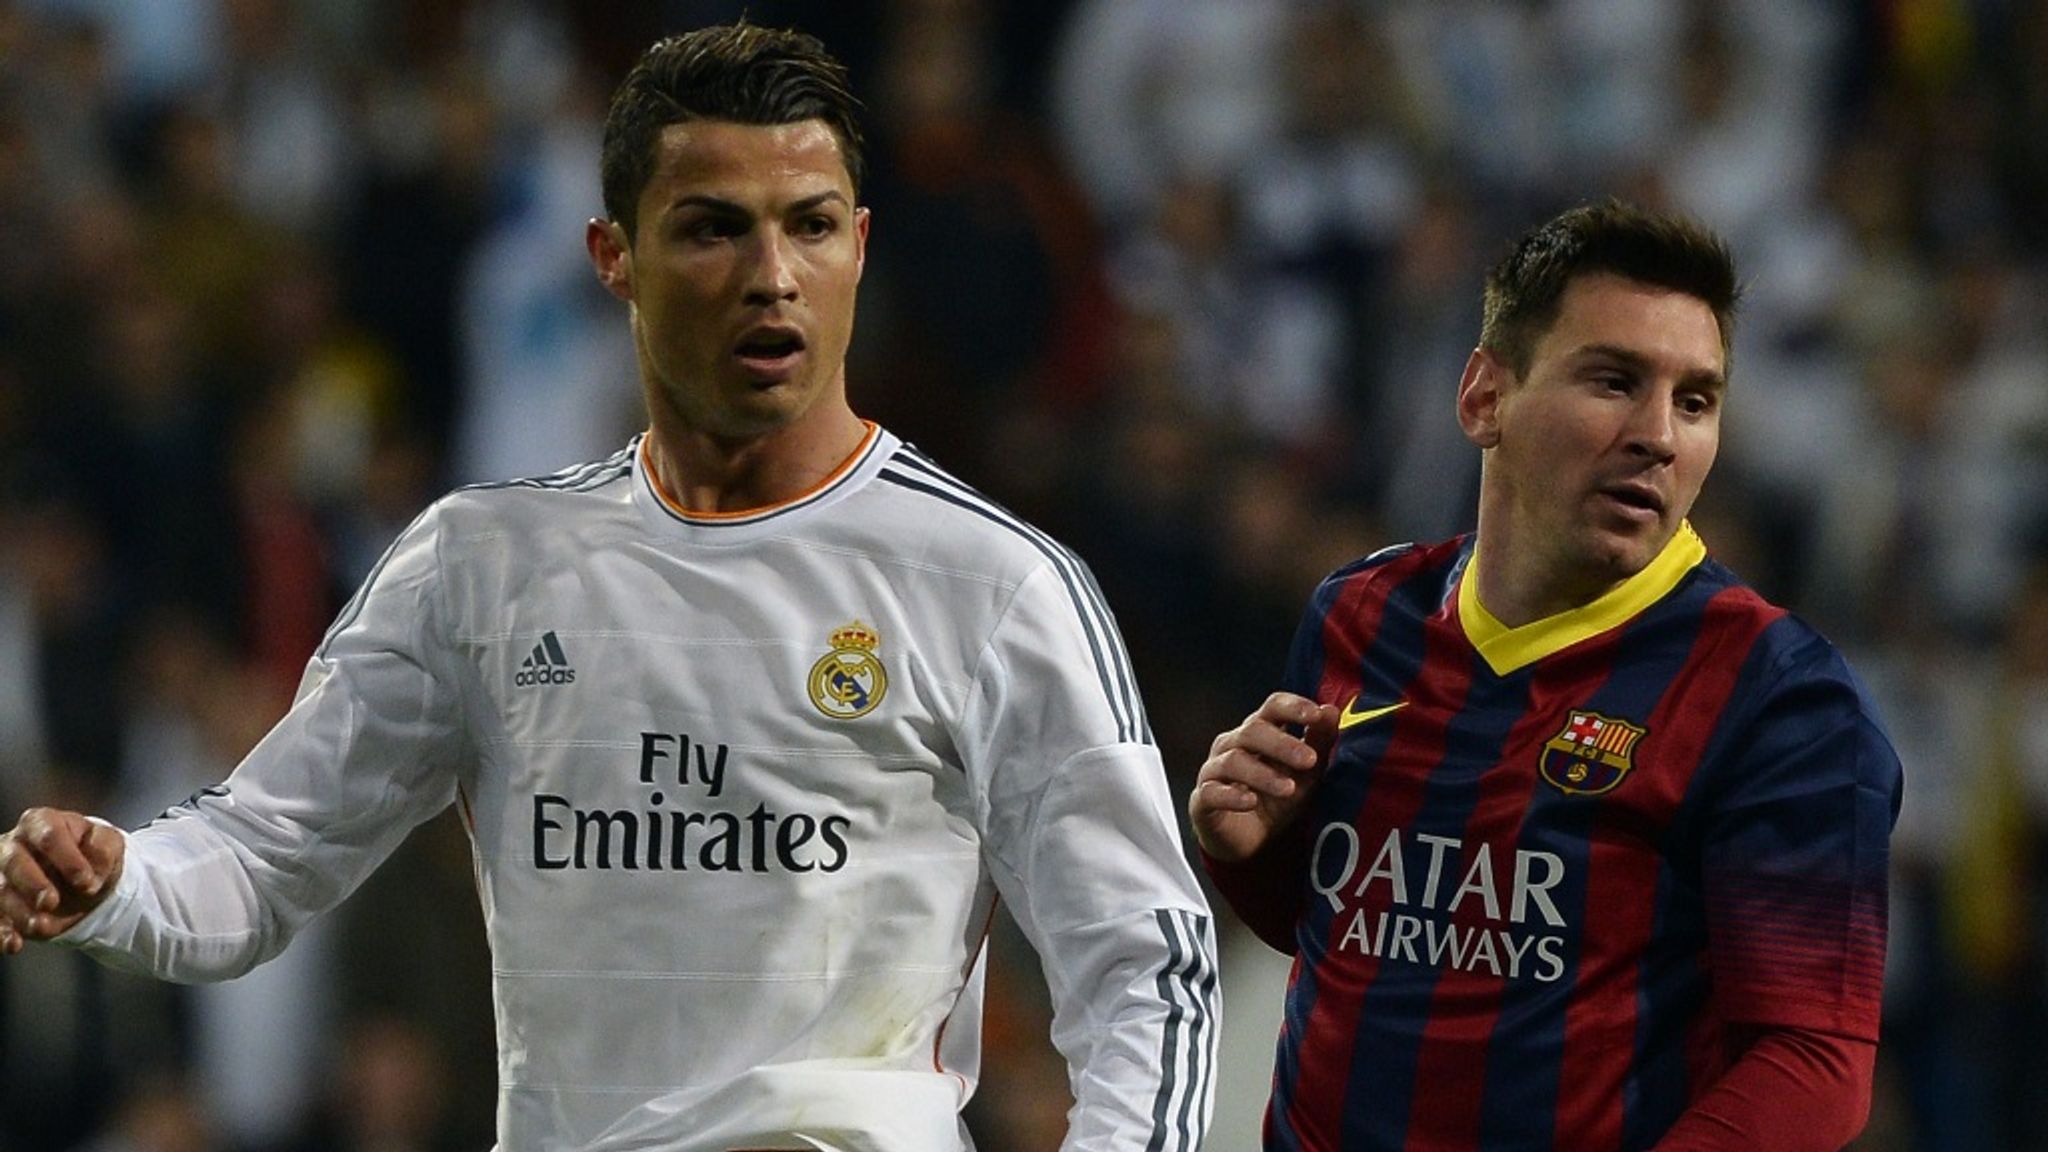 Cristiano Ronaldo Shares Picture With Lionel Messi. Don't Miss The